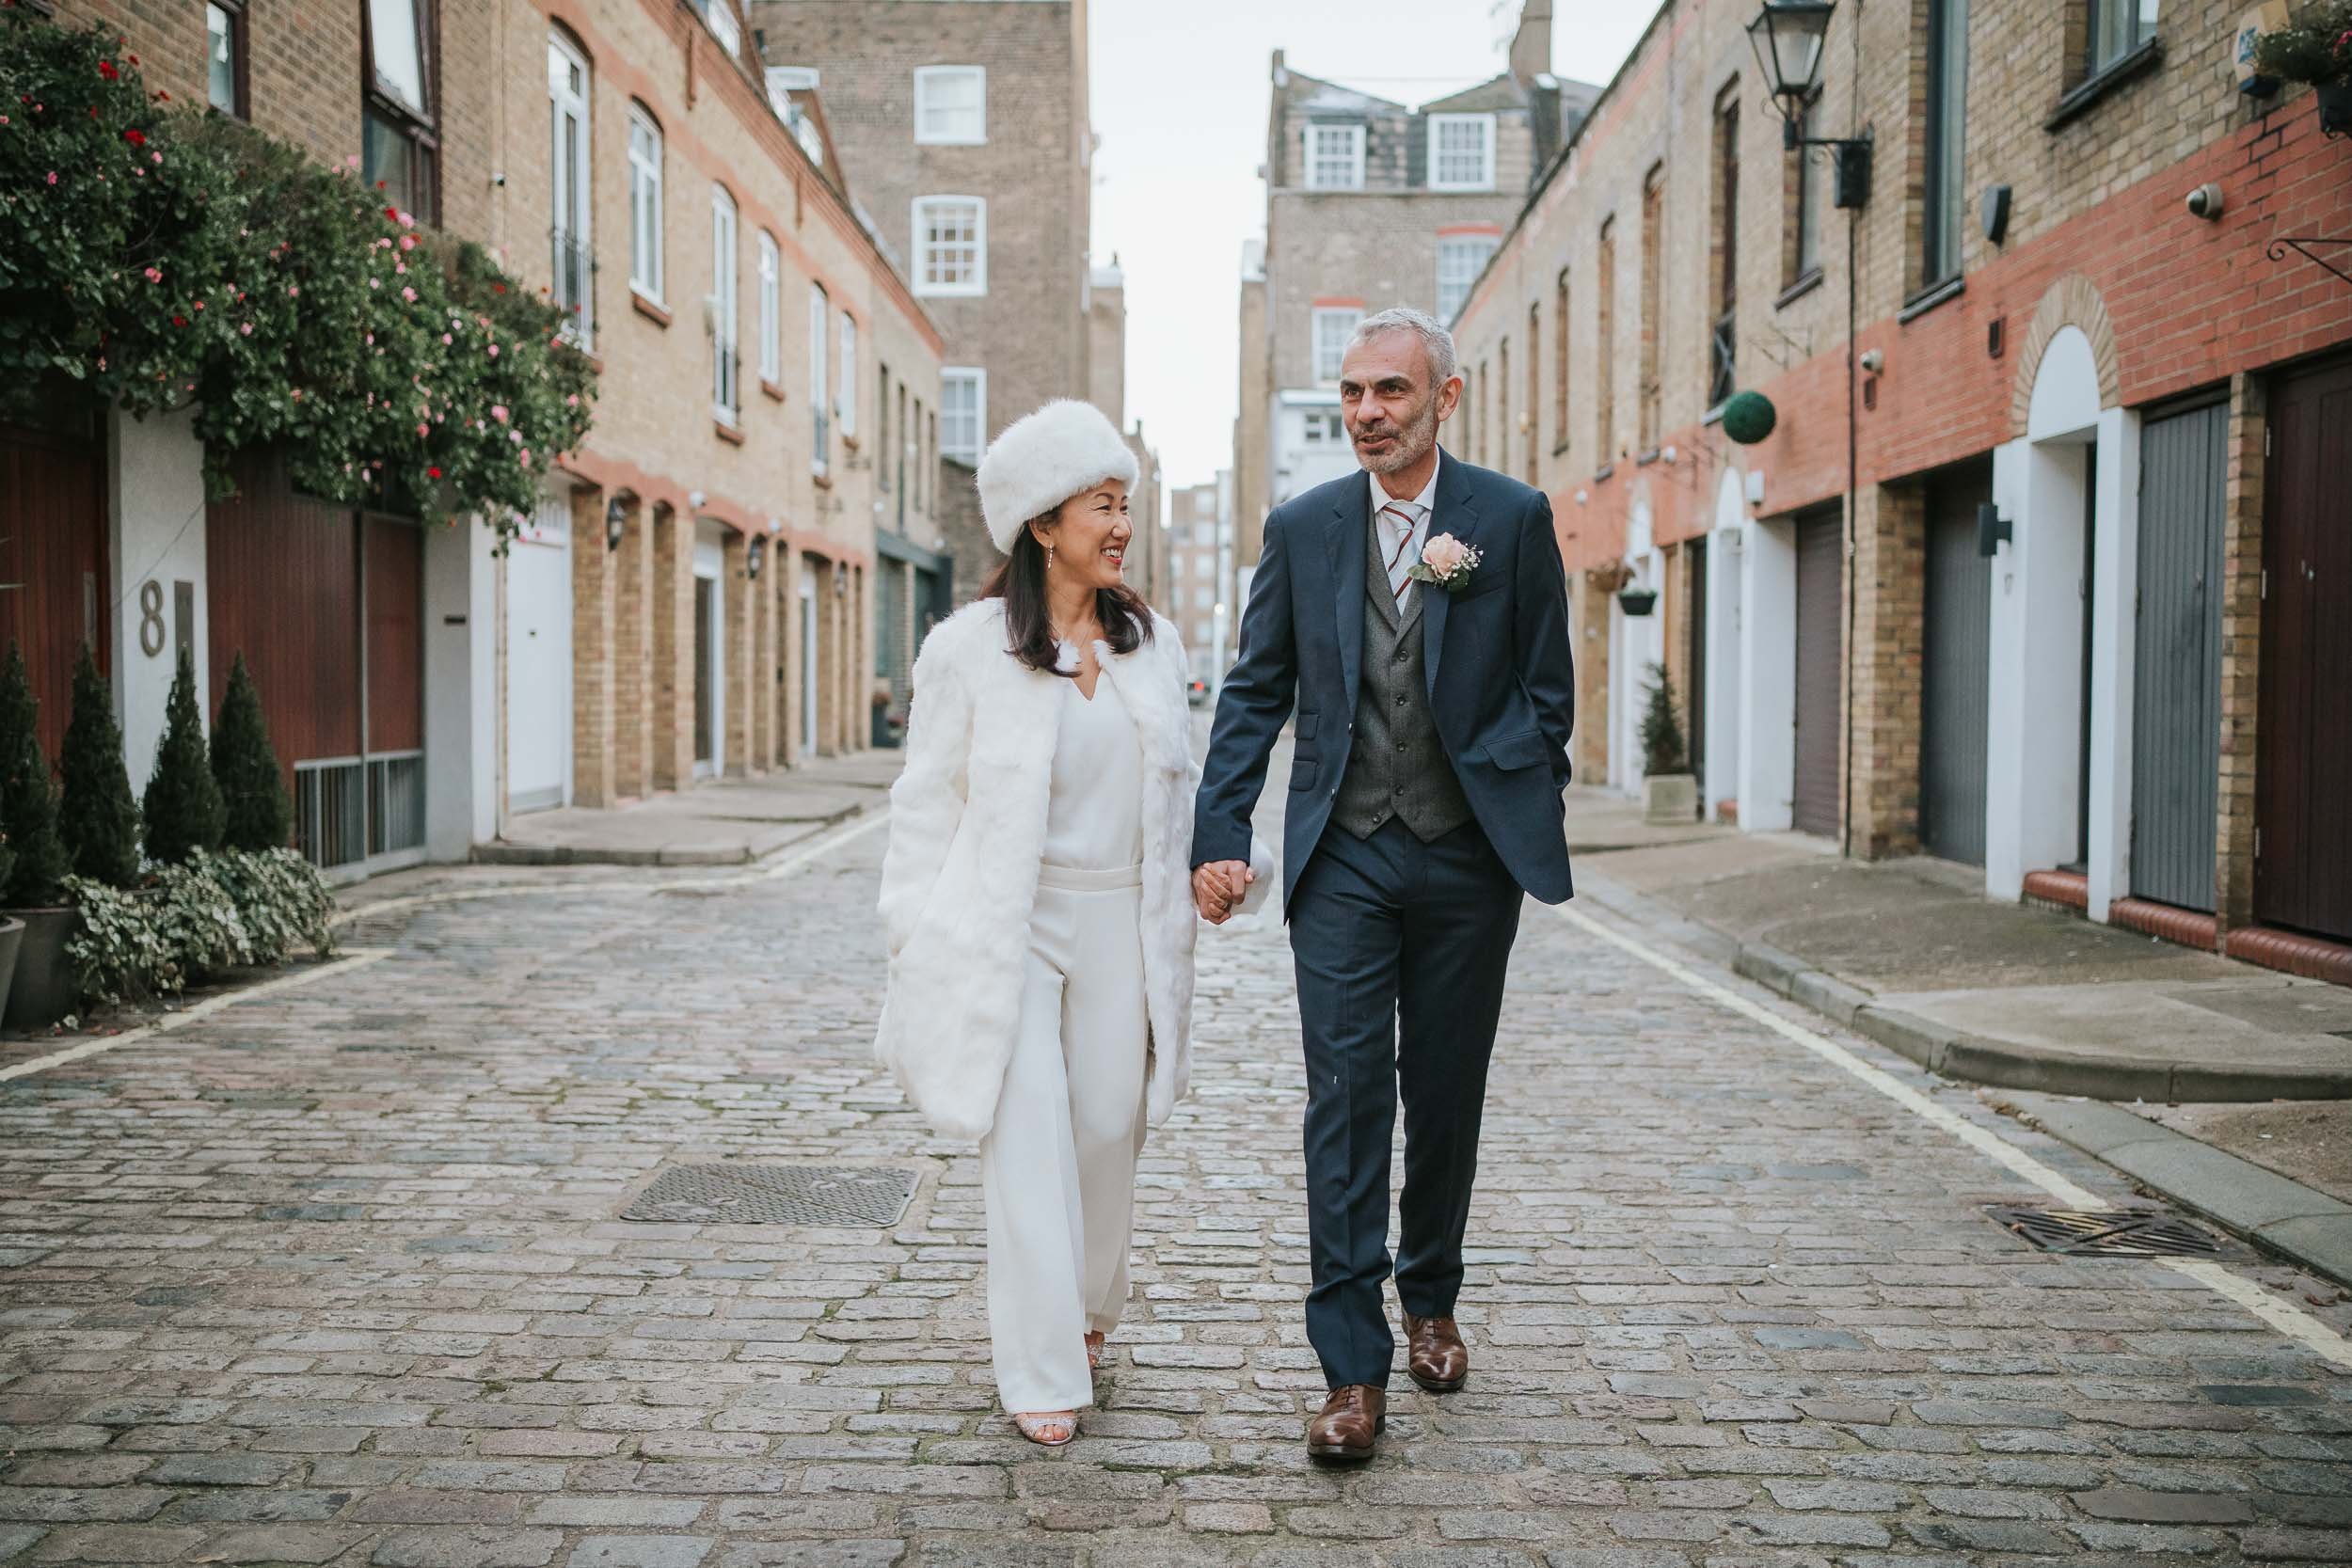  Anne-Marie and Sebastien’s wedding photoshoot after their wedding at Marylebone Town Hall in London. 